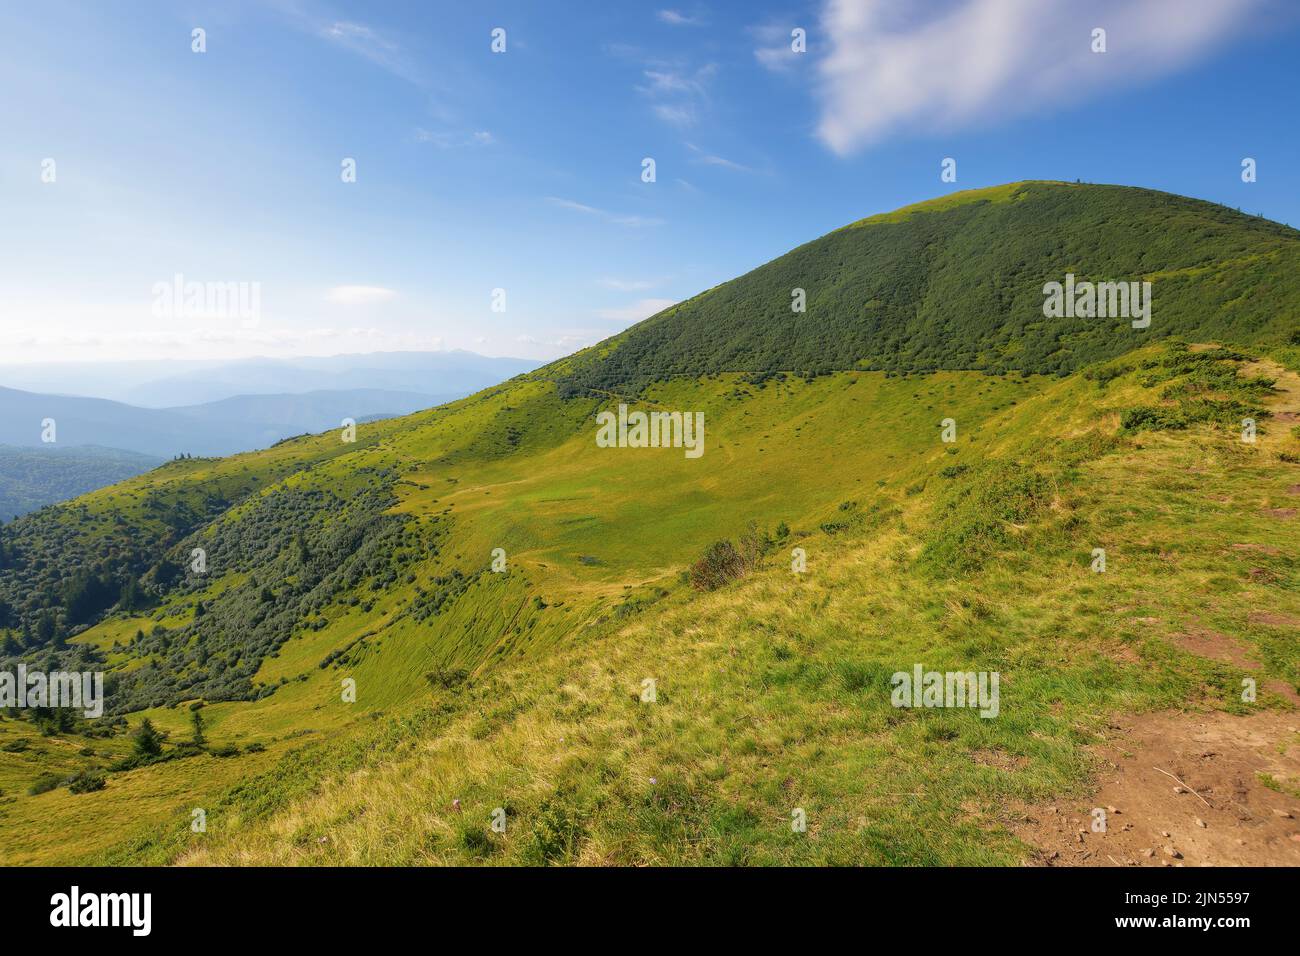 carpathian mountain range in summer. landscape with forested hills and grassy meadows rolling down in to the valley. travel ukraine Stock Photo